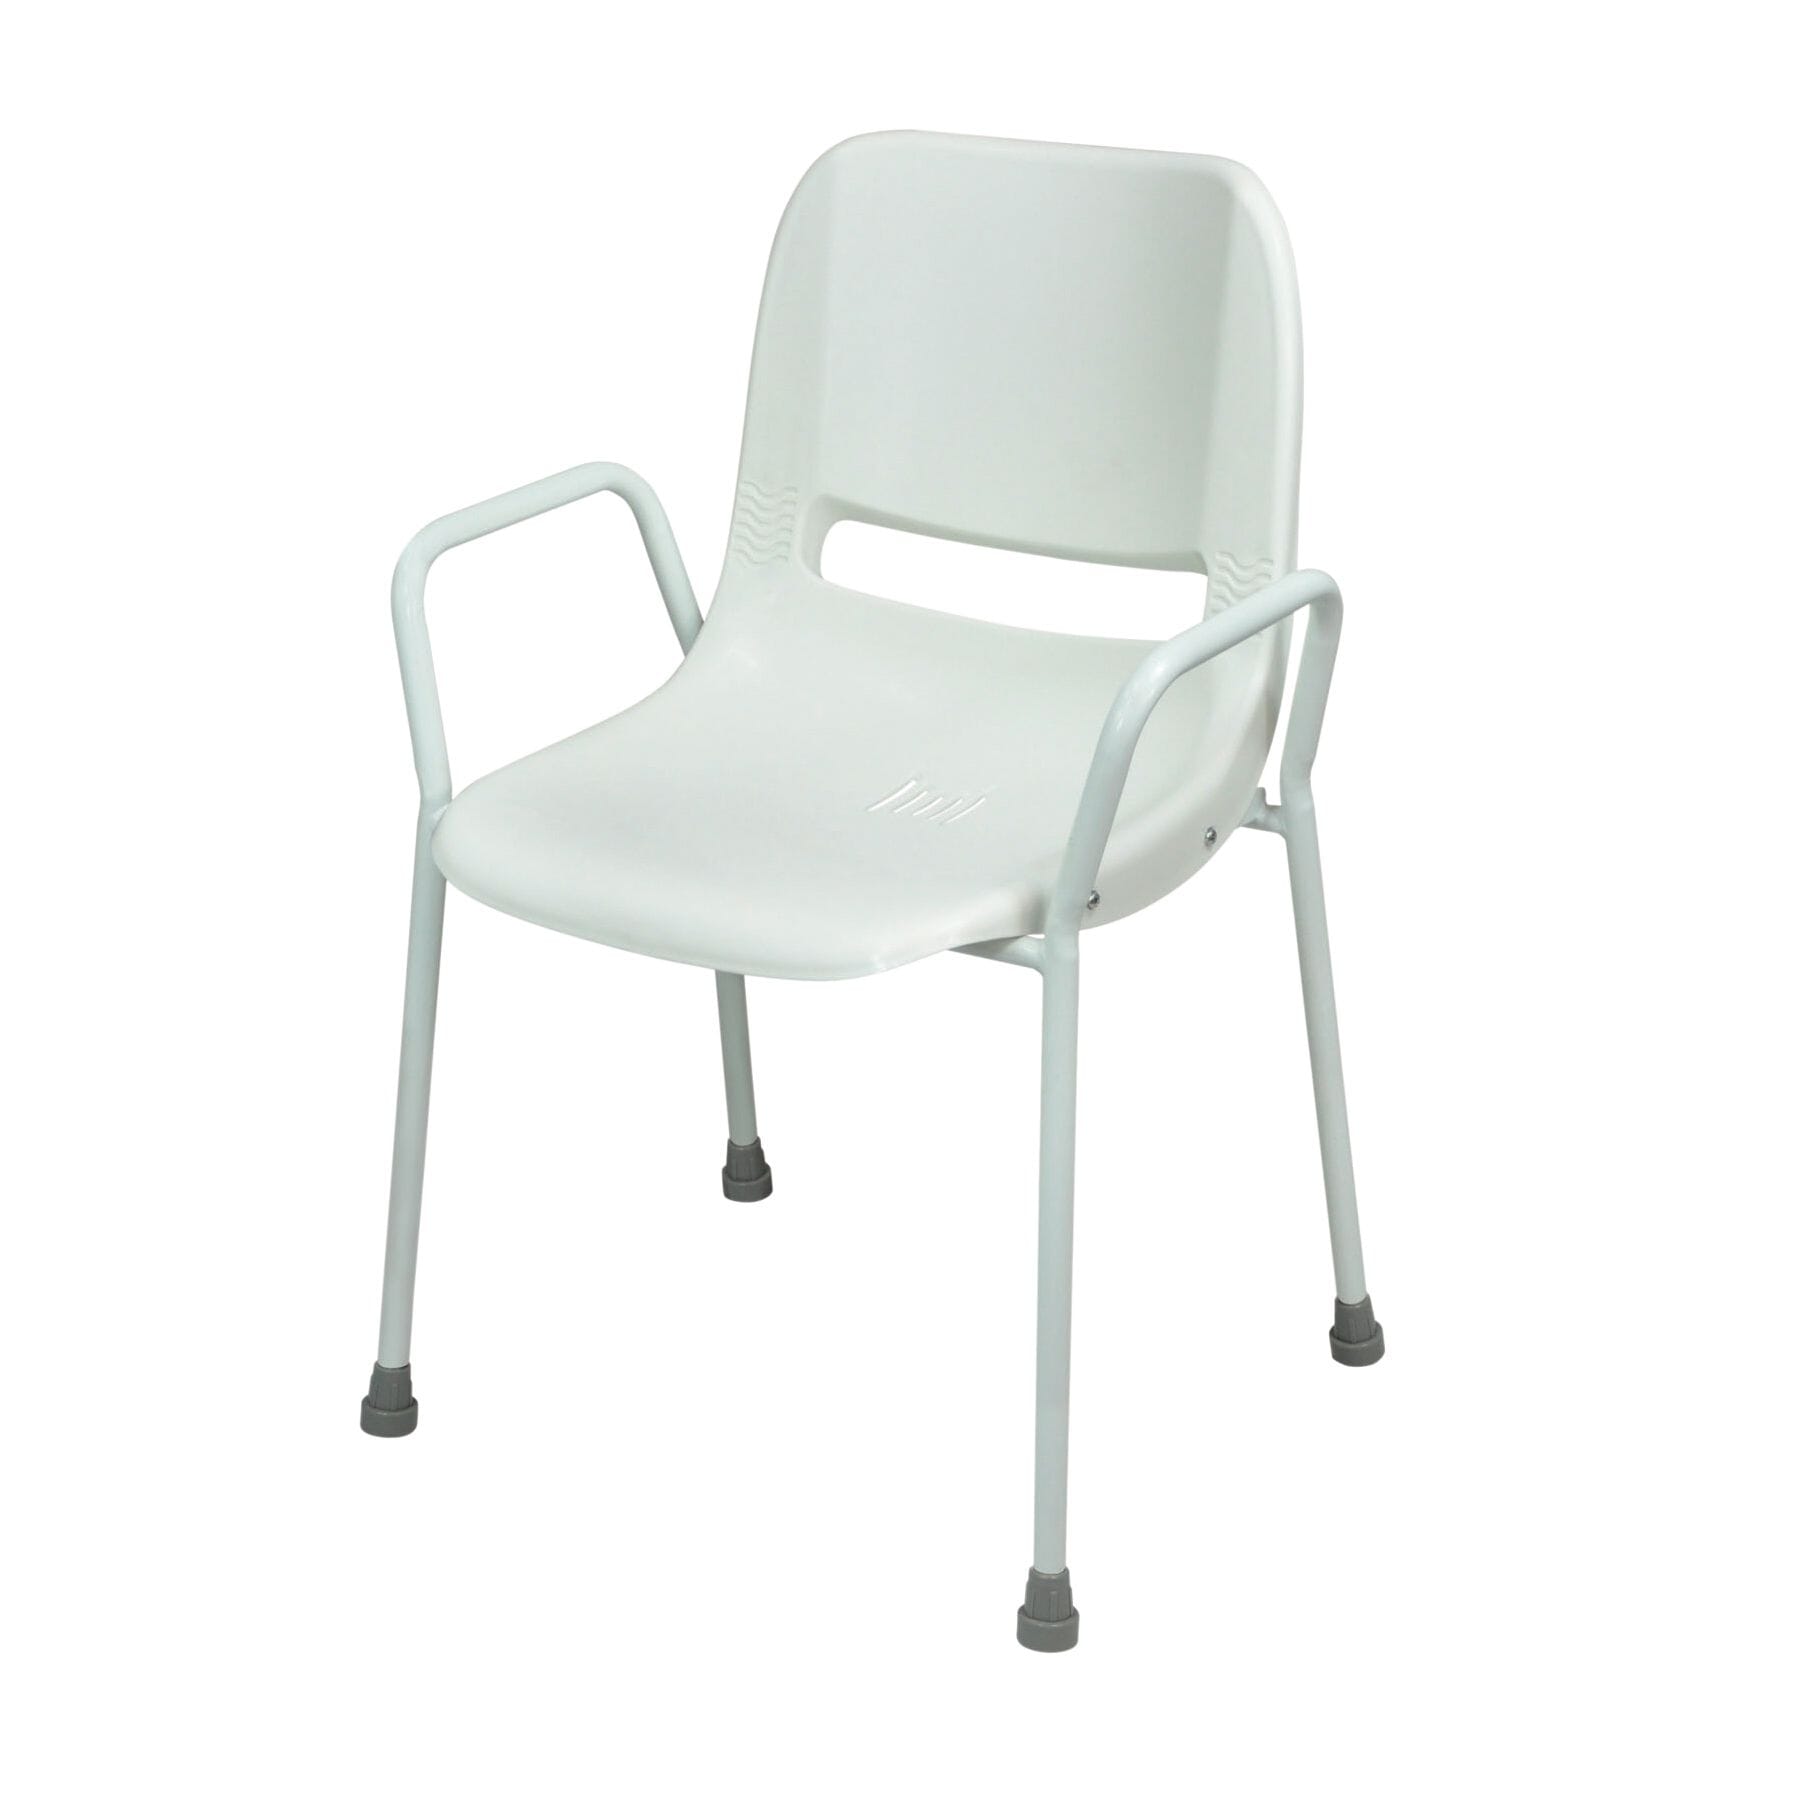 View Milton Stackable Portable Shower Chair Adjustable Height White information